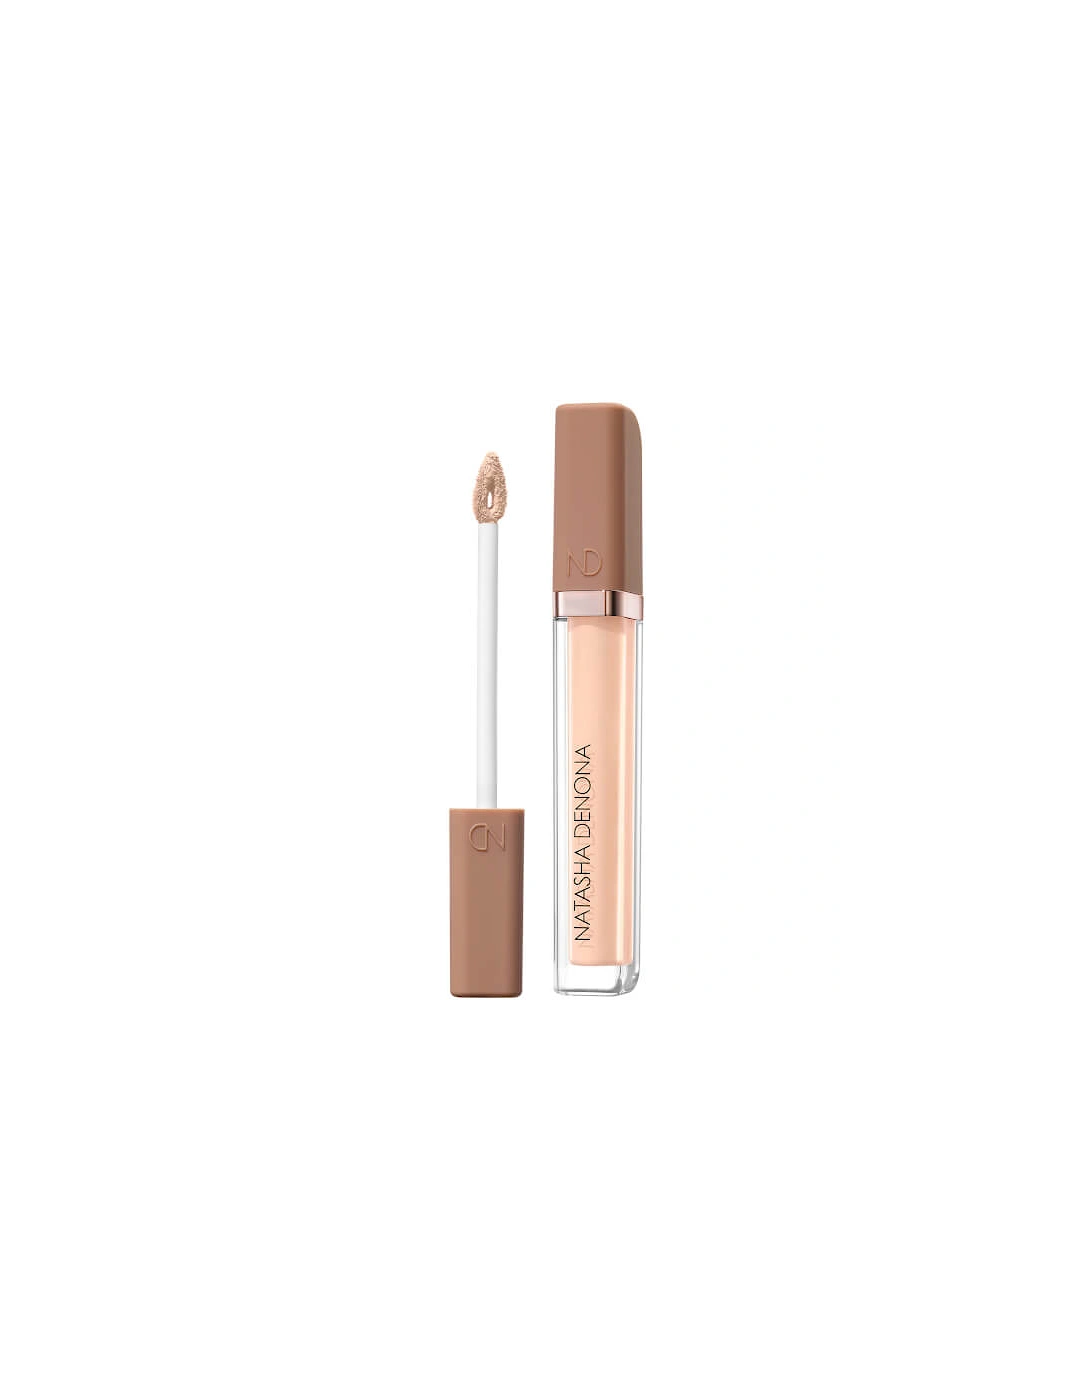 Hy-Glam Concealer - P1, 2 of 1